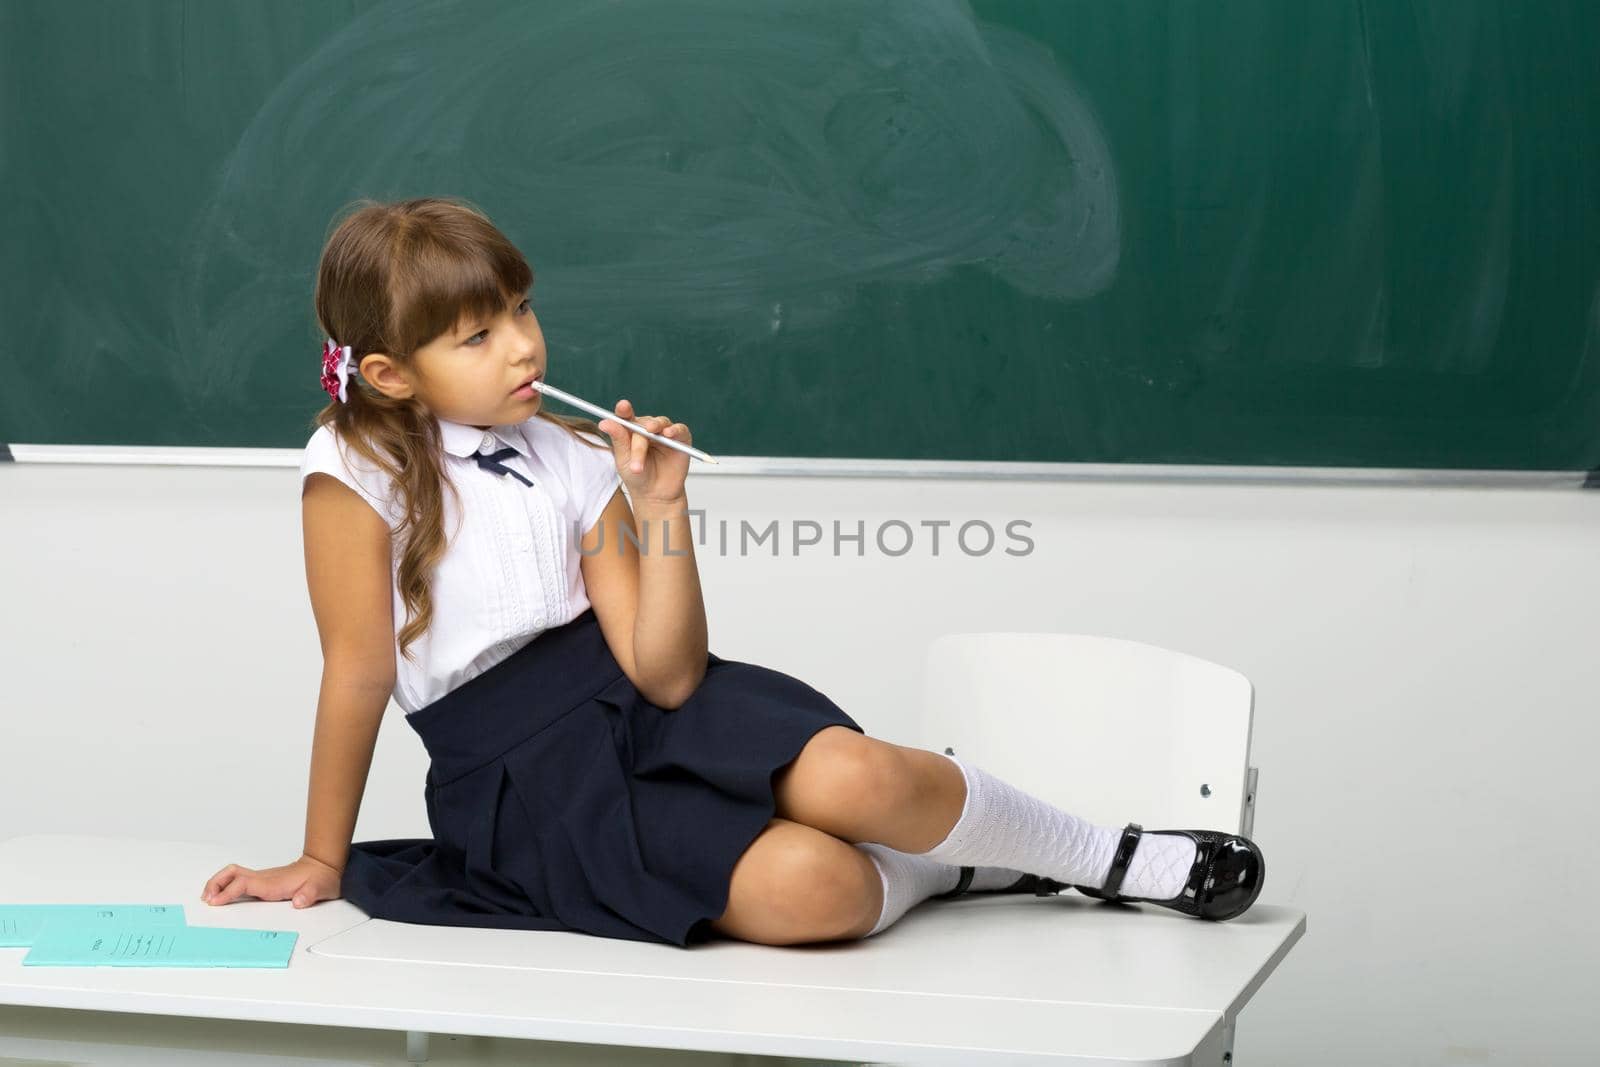 Cute girl sitting on desk in classroom. Adorable girl student in white blouse and blue skirt holding pen in her hand posing at blackboard. School and education concept